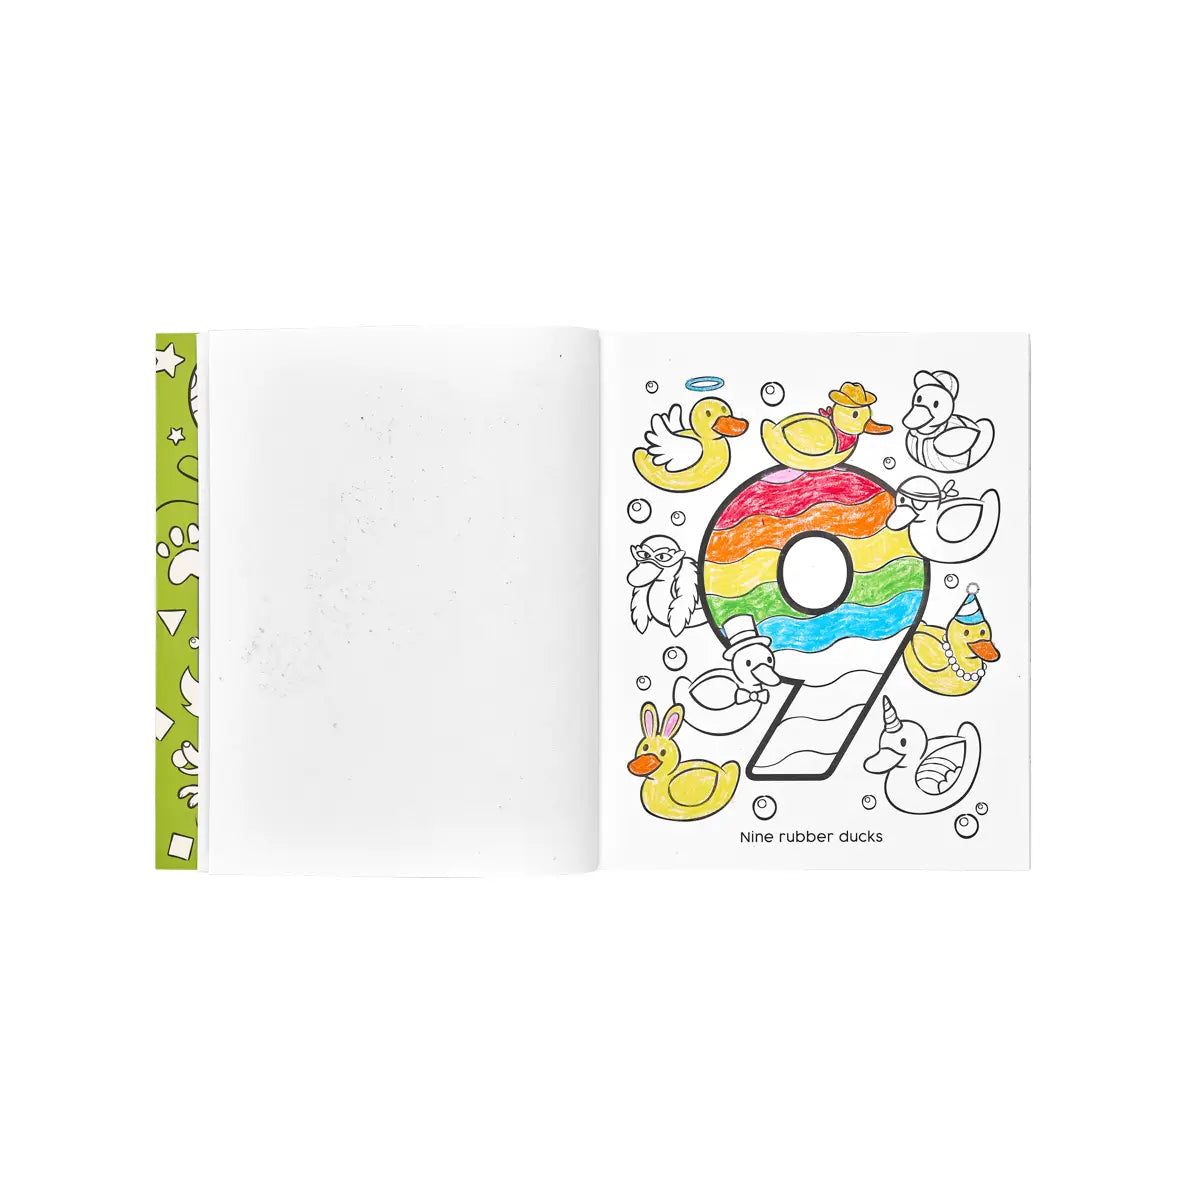 Ooly Toddler Color-in' Book: 123 Shapes & Numbers